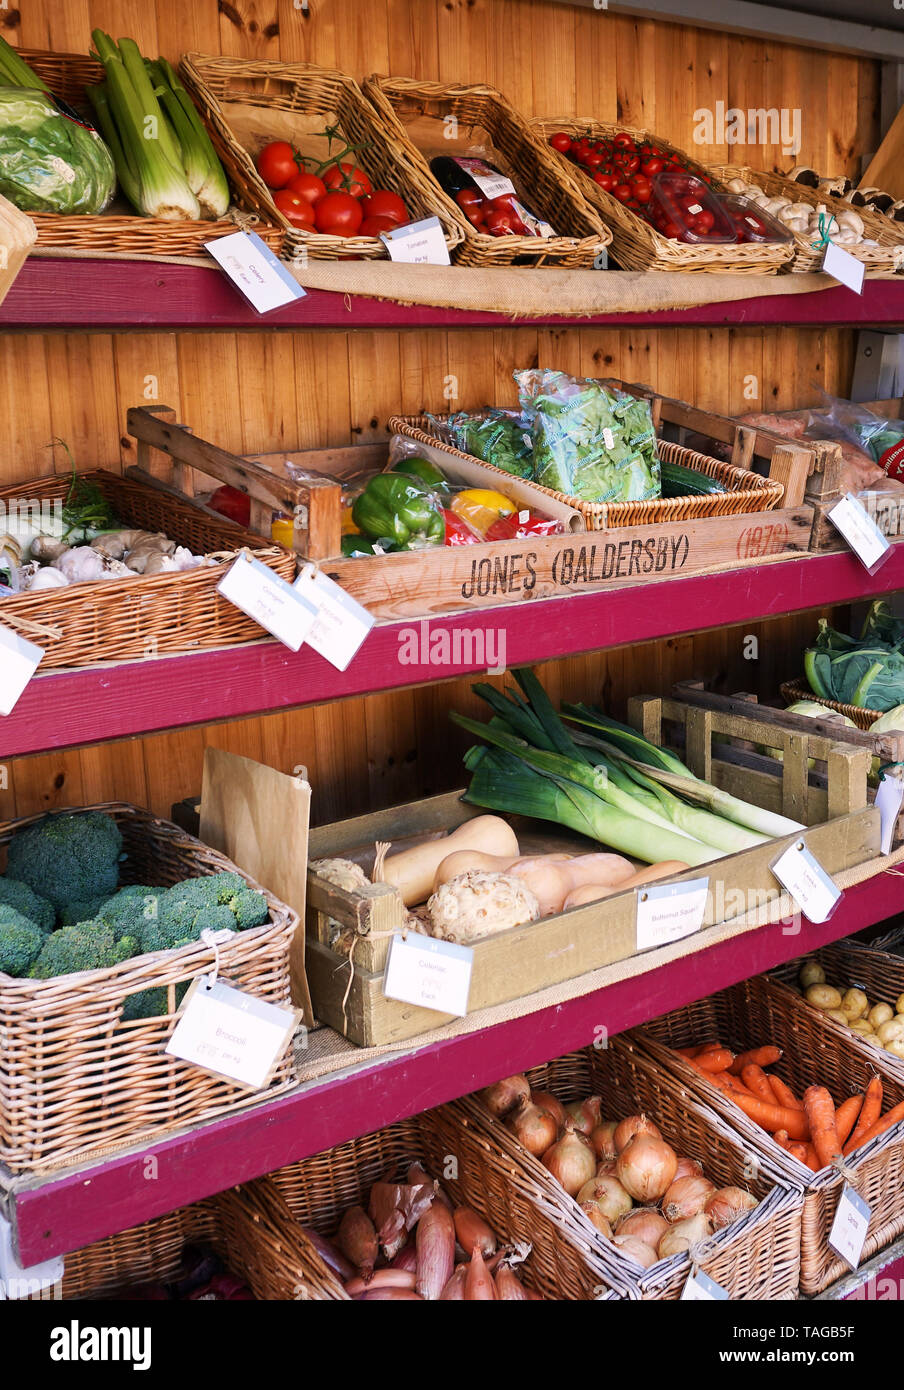 Outdoor Kiosk with shelves filled with fresh vegetables Stock Photo